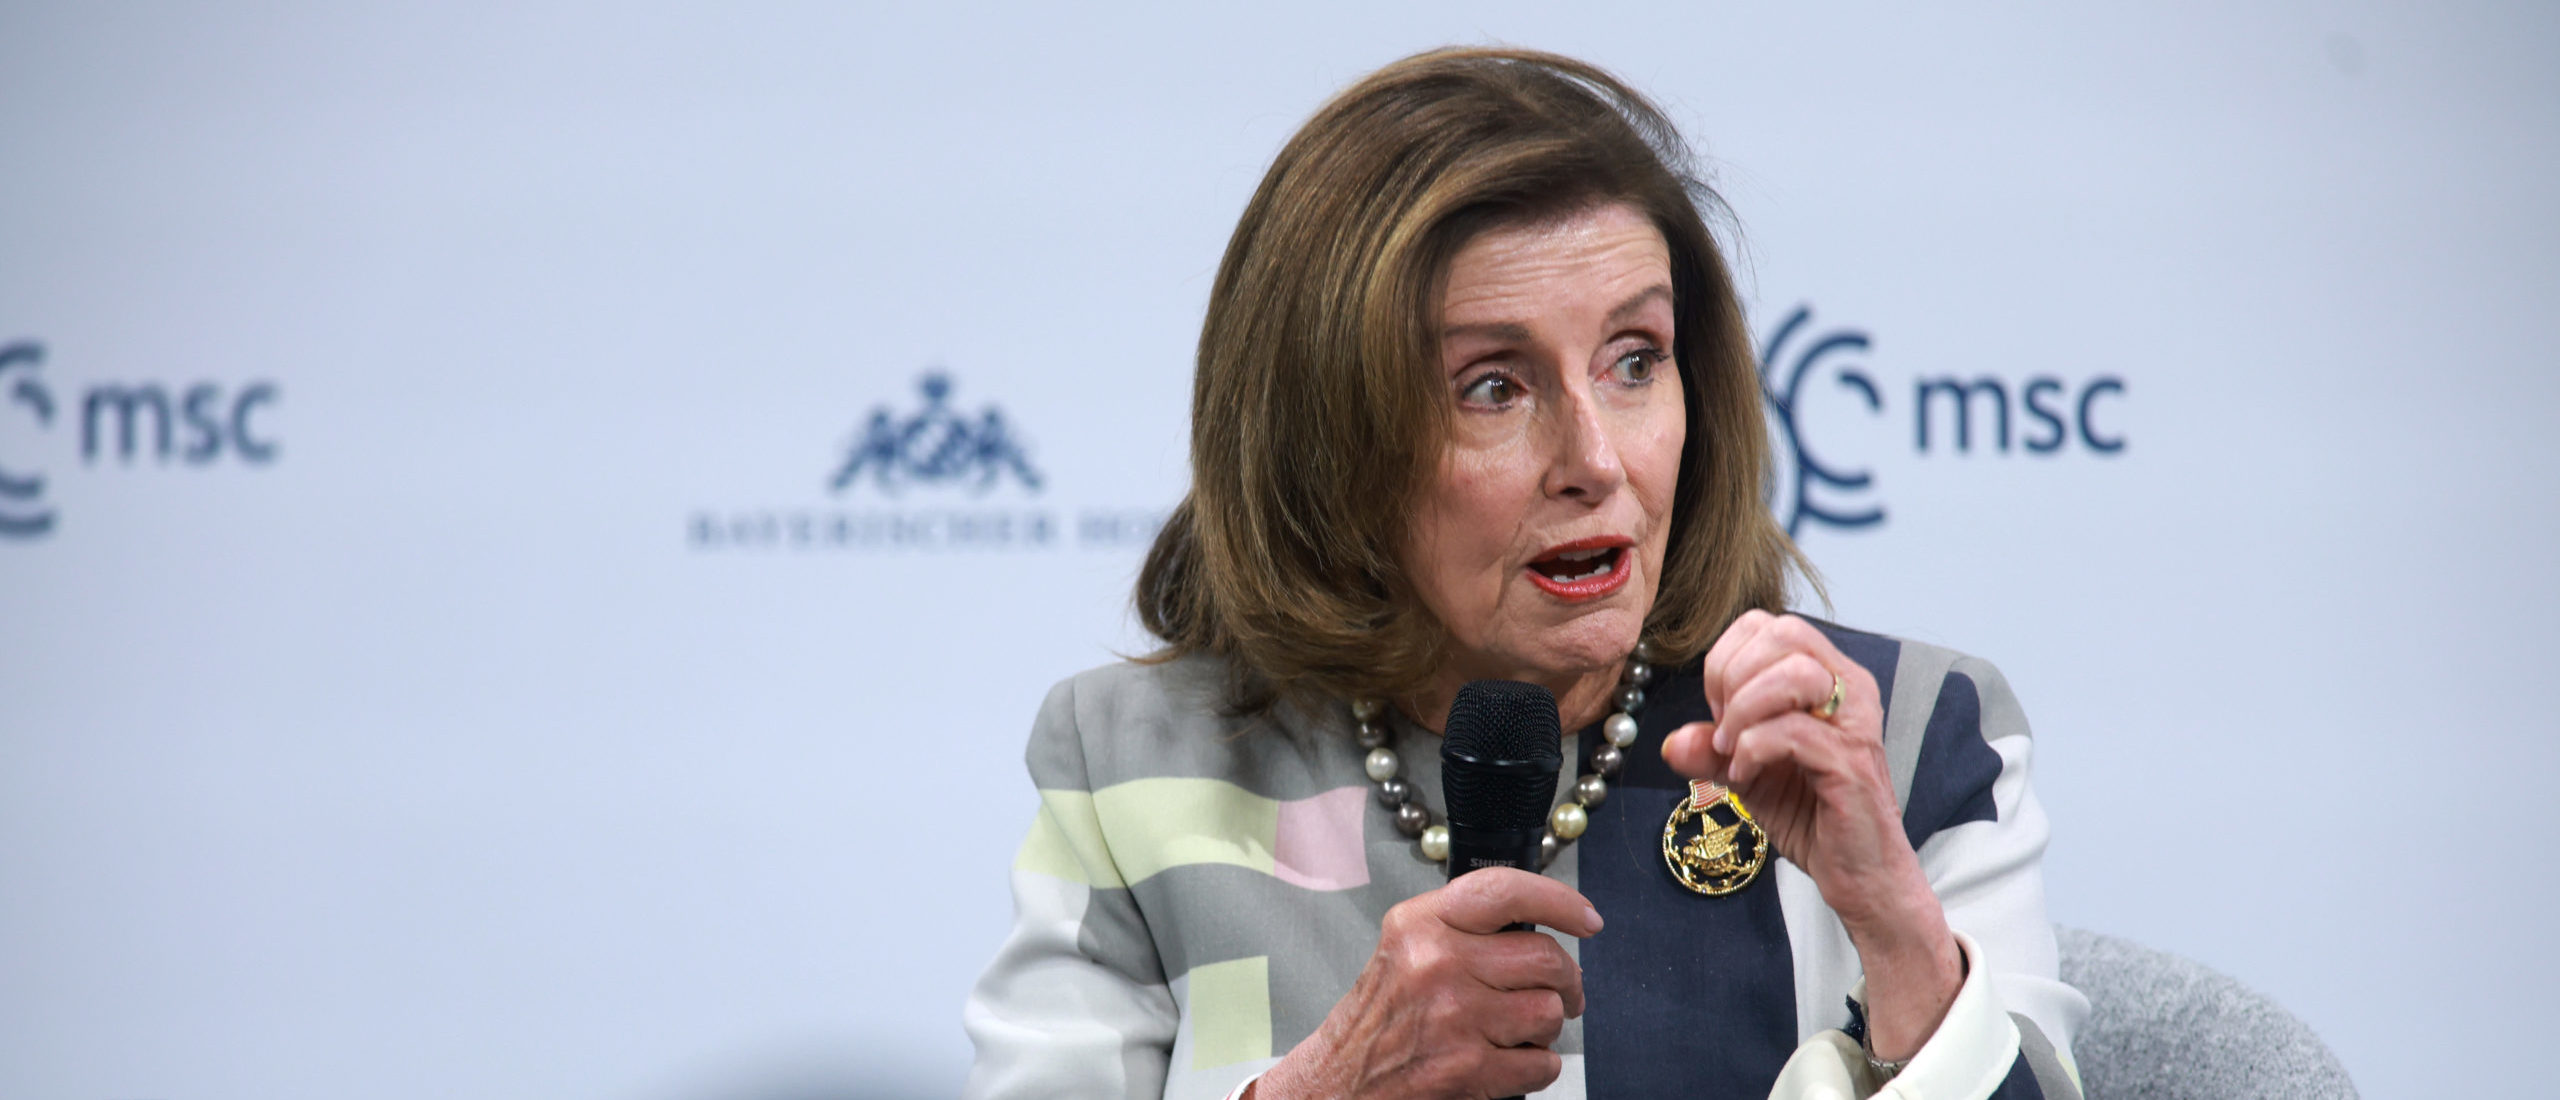 Protesters Charged With Vandalizing Nancy Pelosi’s House: Report